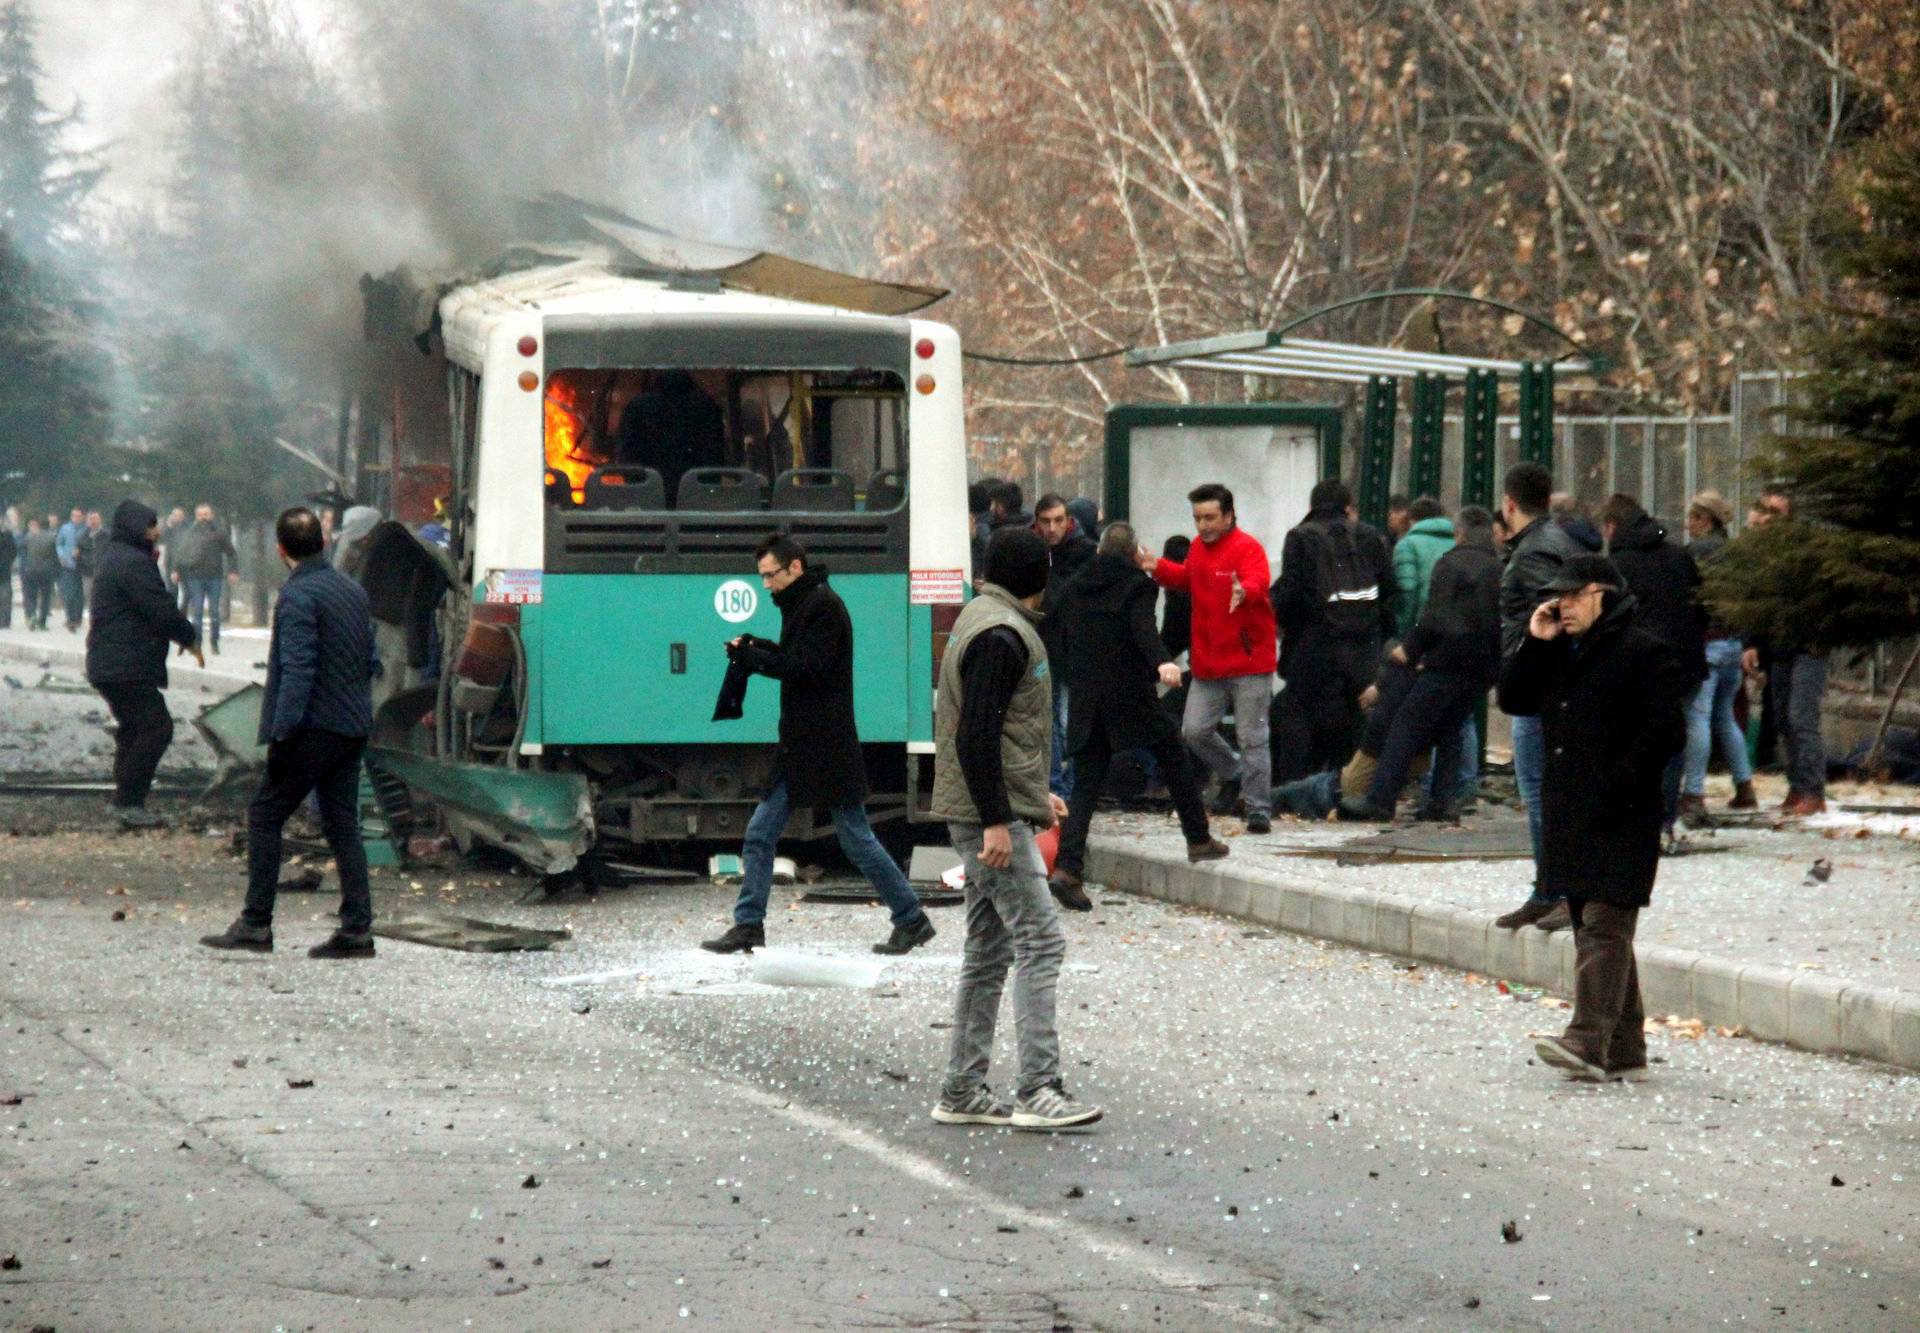 People react after a bus was hit by an explosion in Kayseri